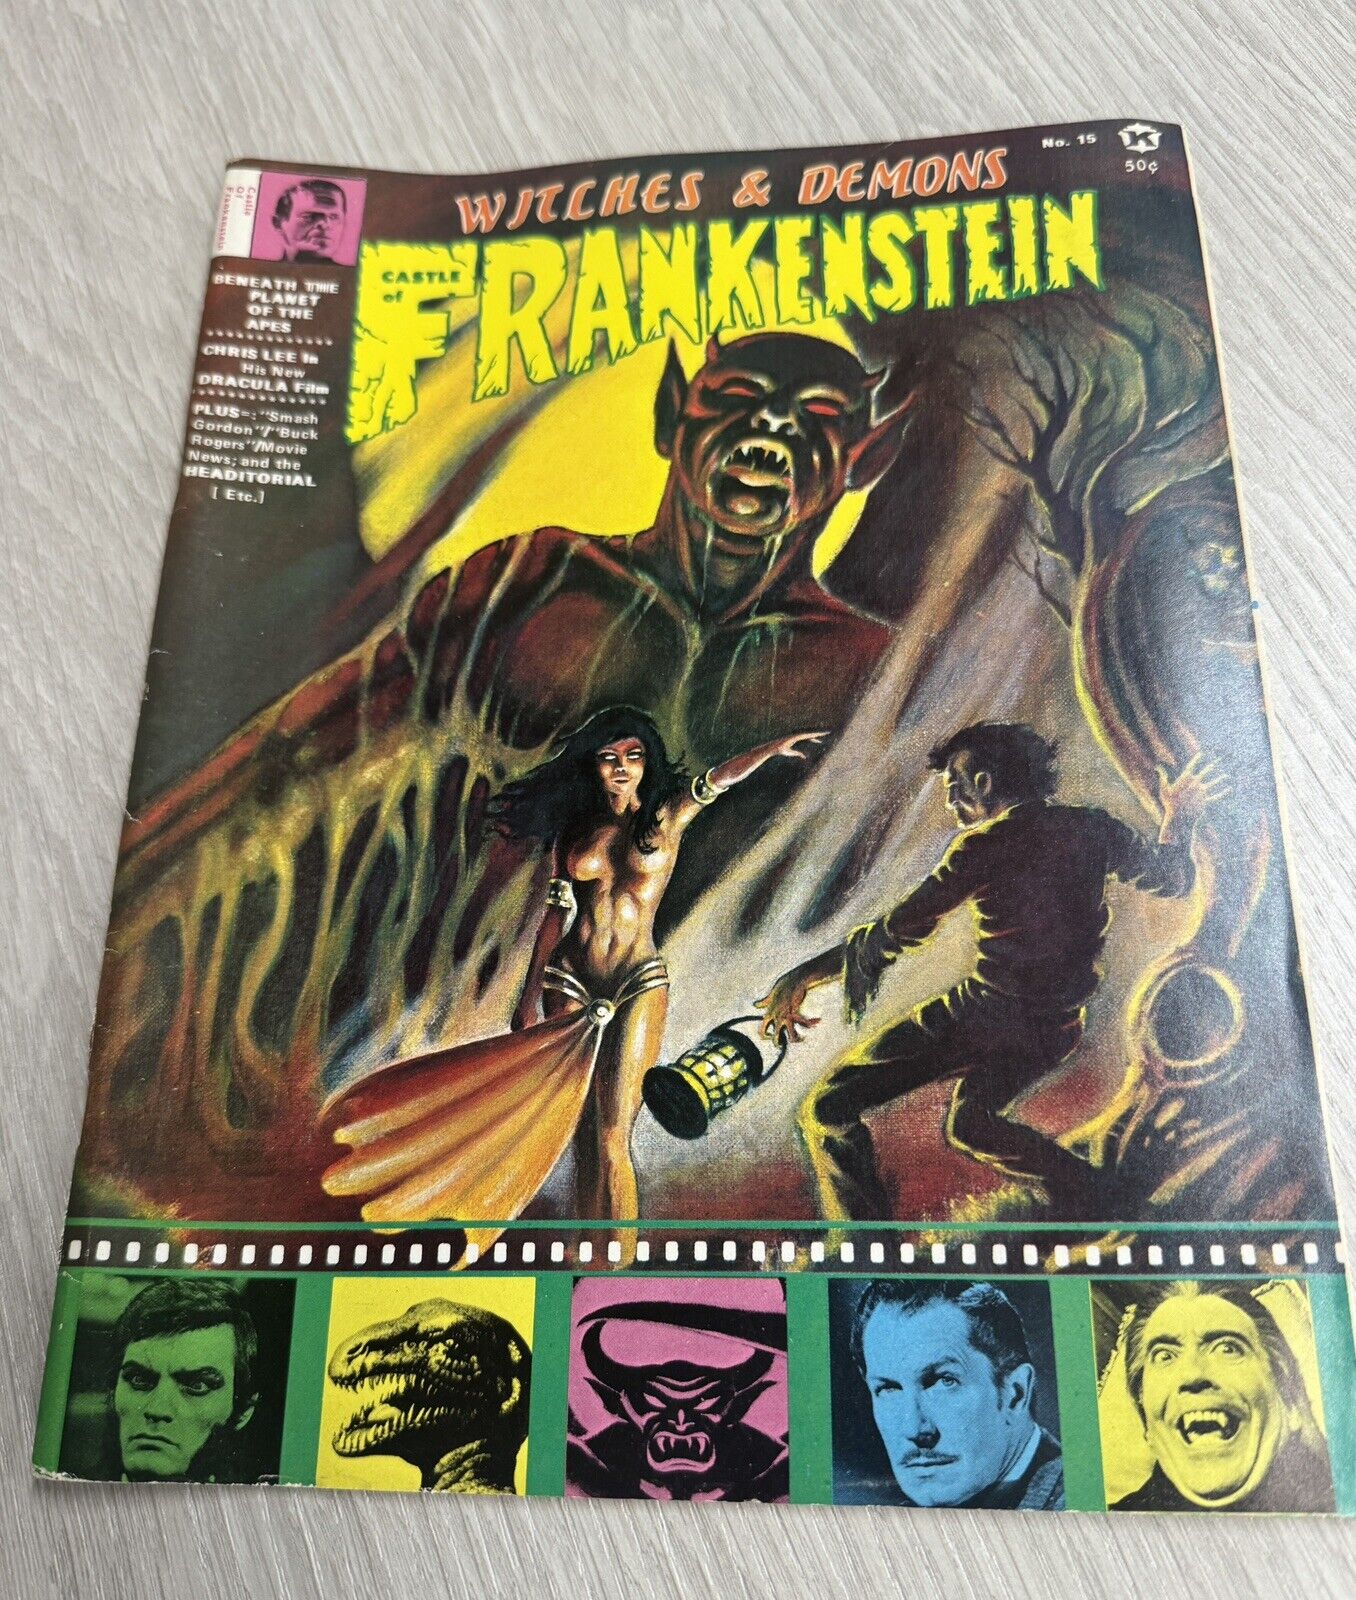 Castle of Frankenstein (1970) Witches and Demons Planet of the Apes